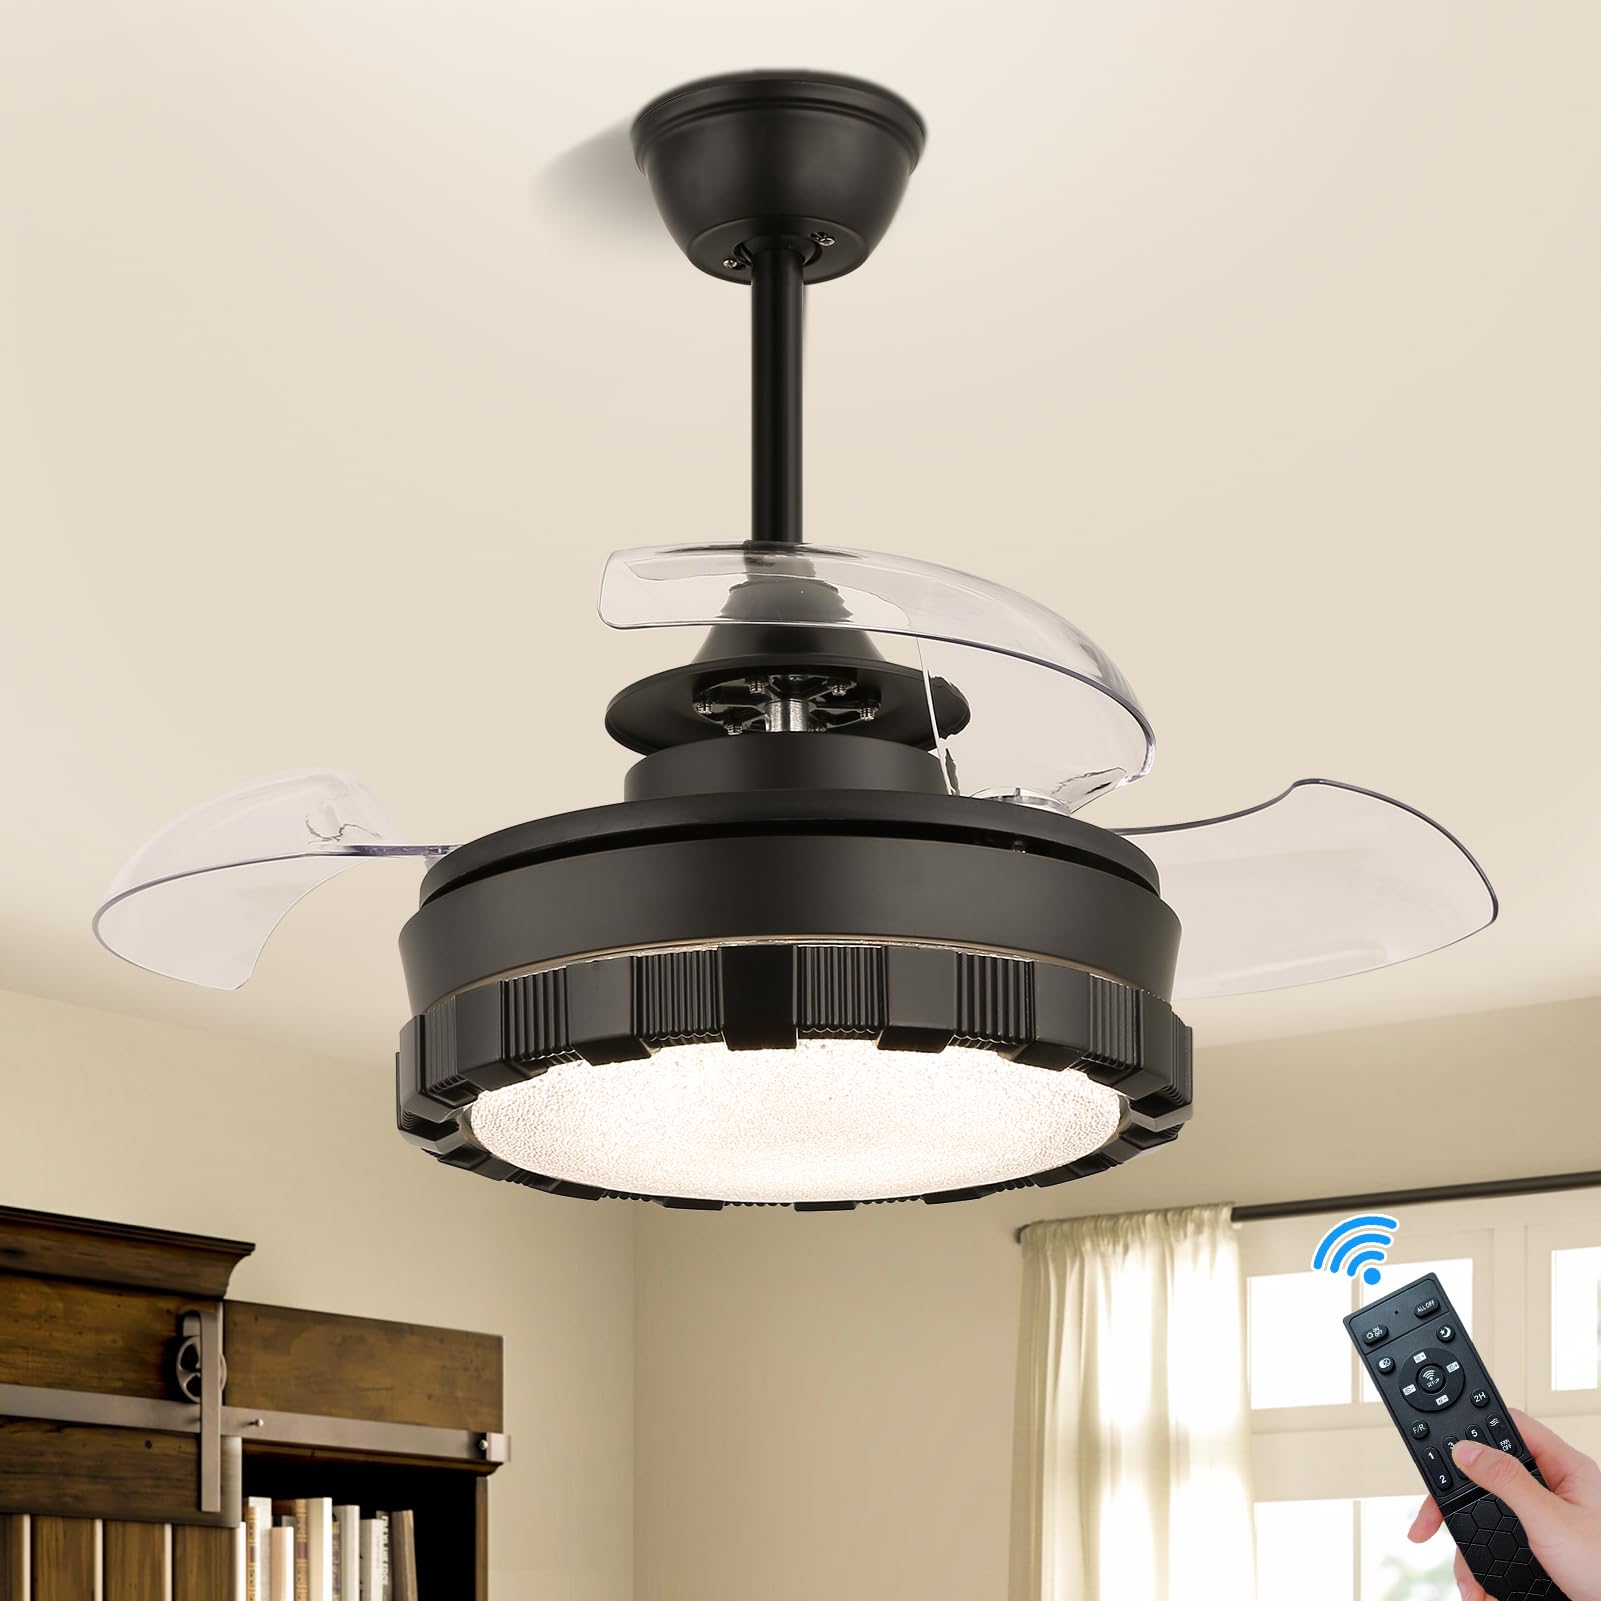 Finktonglan 22'' Ceiling Fans with Lights, Dimmable Small Ceiling Fans Retractable Blades, LED Kids Fandelier for Bedroom Living Room, 6 Speeds, 3 Color Change, Low Sound(Black)